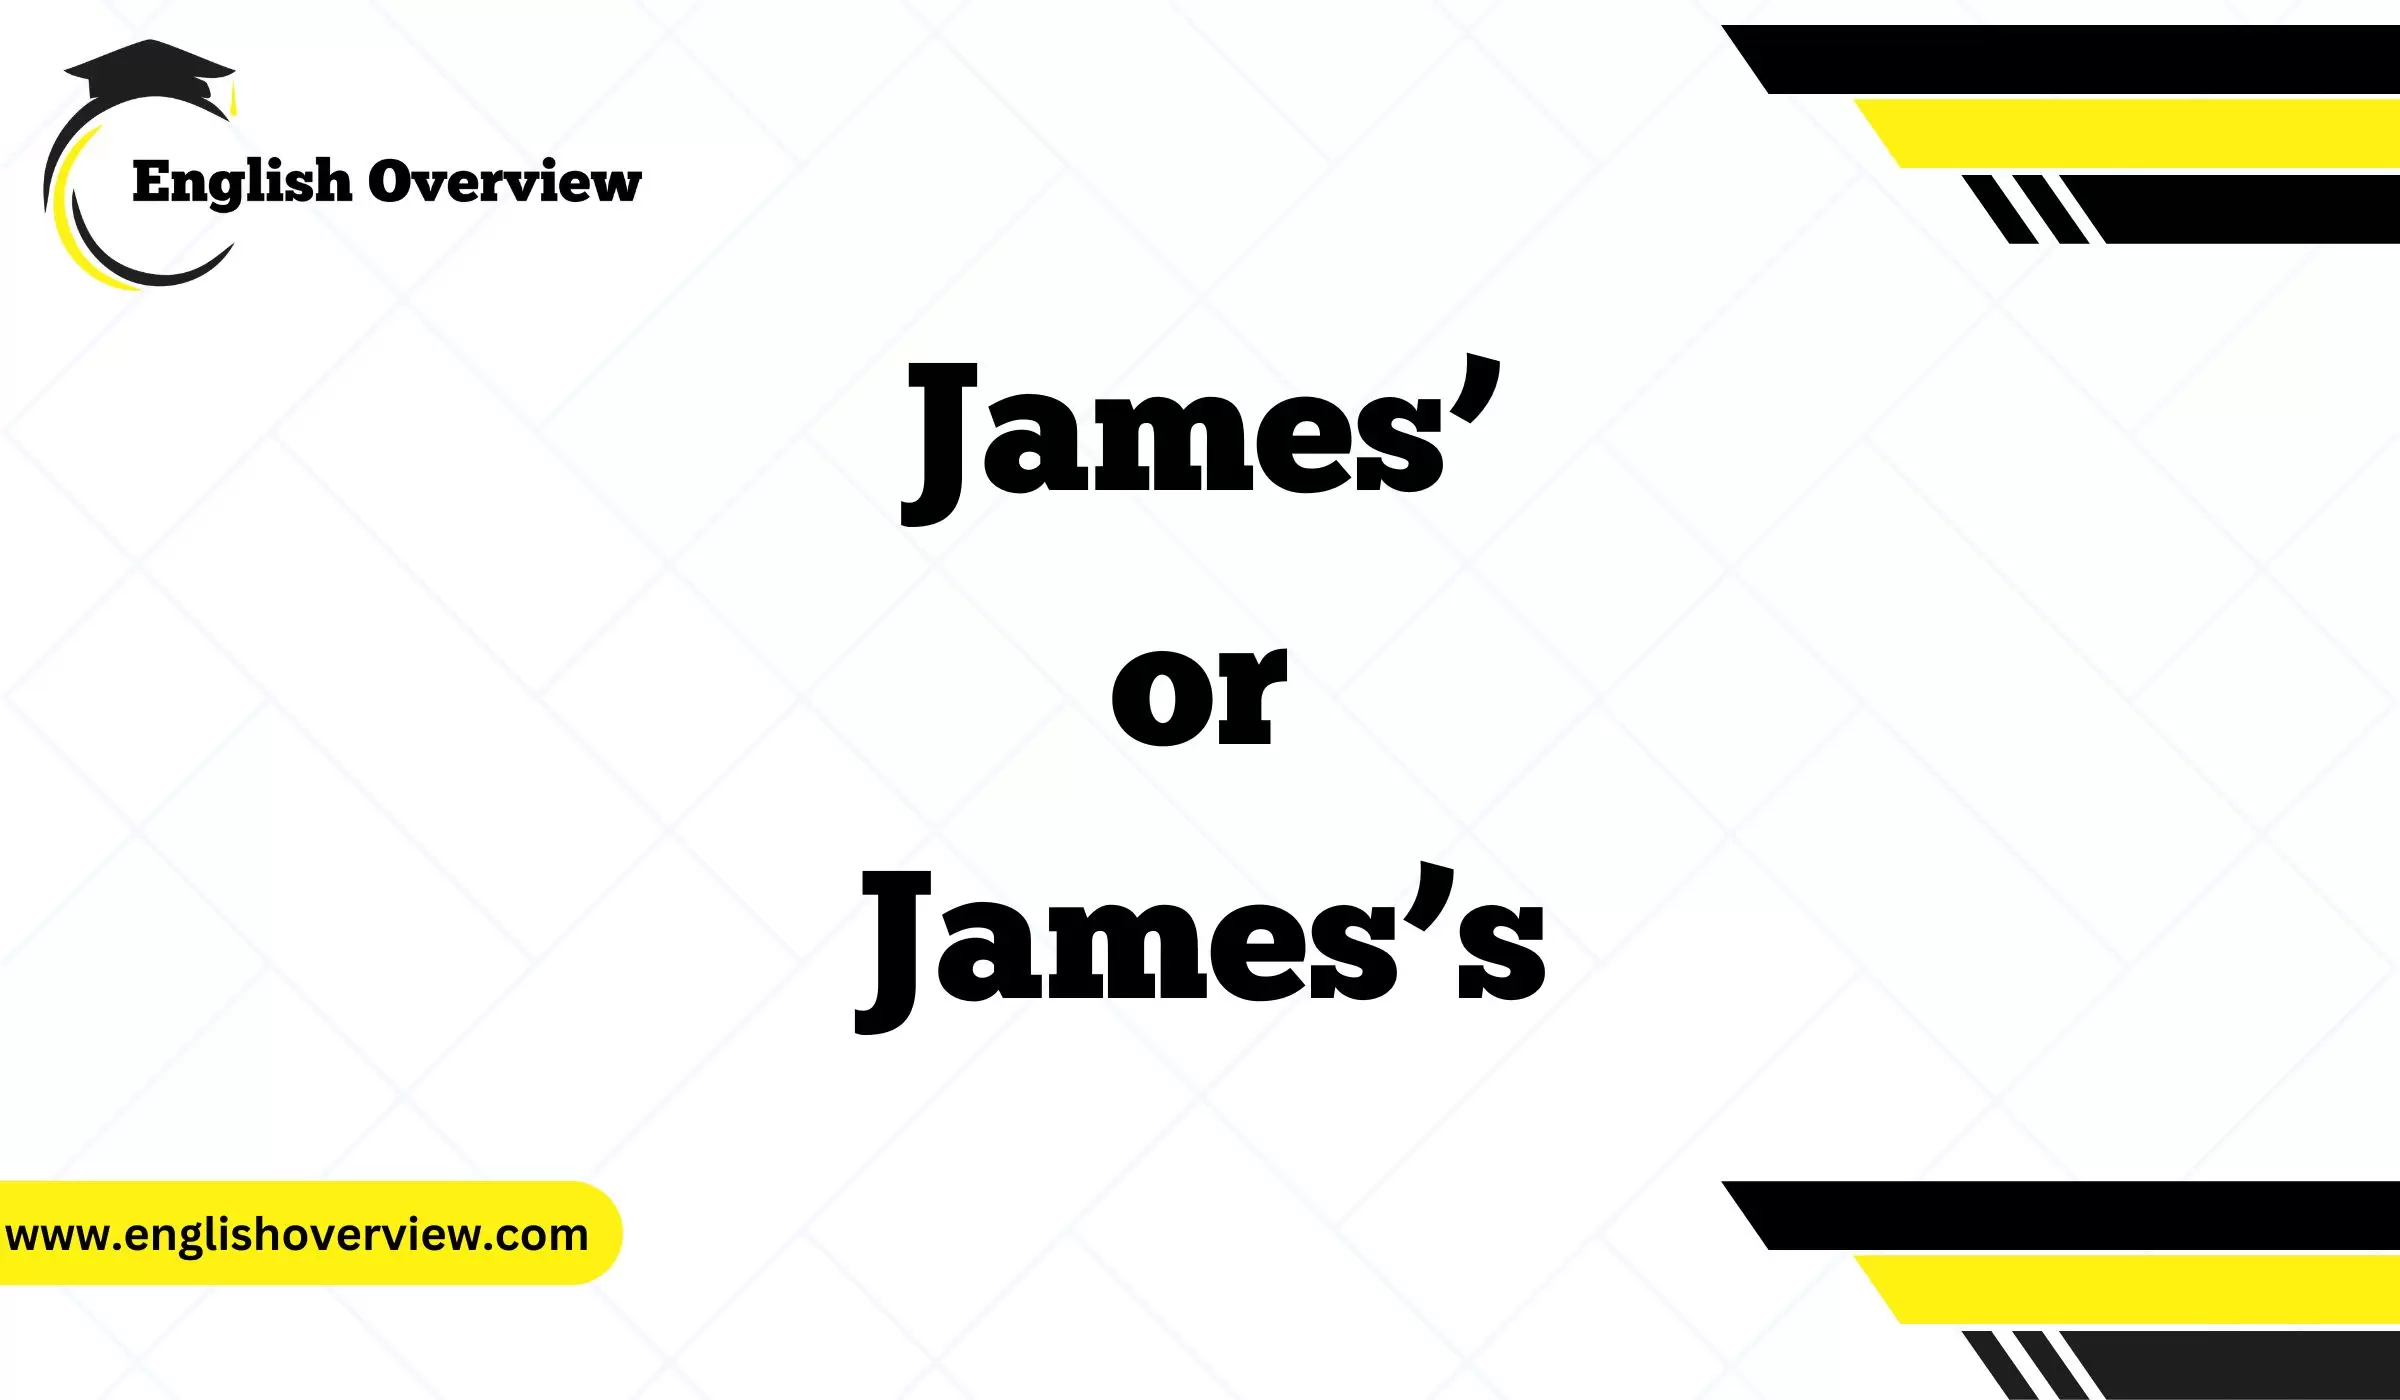 James’ or James’s